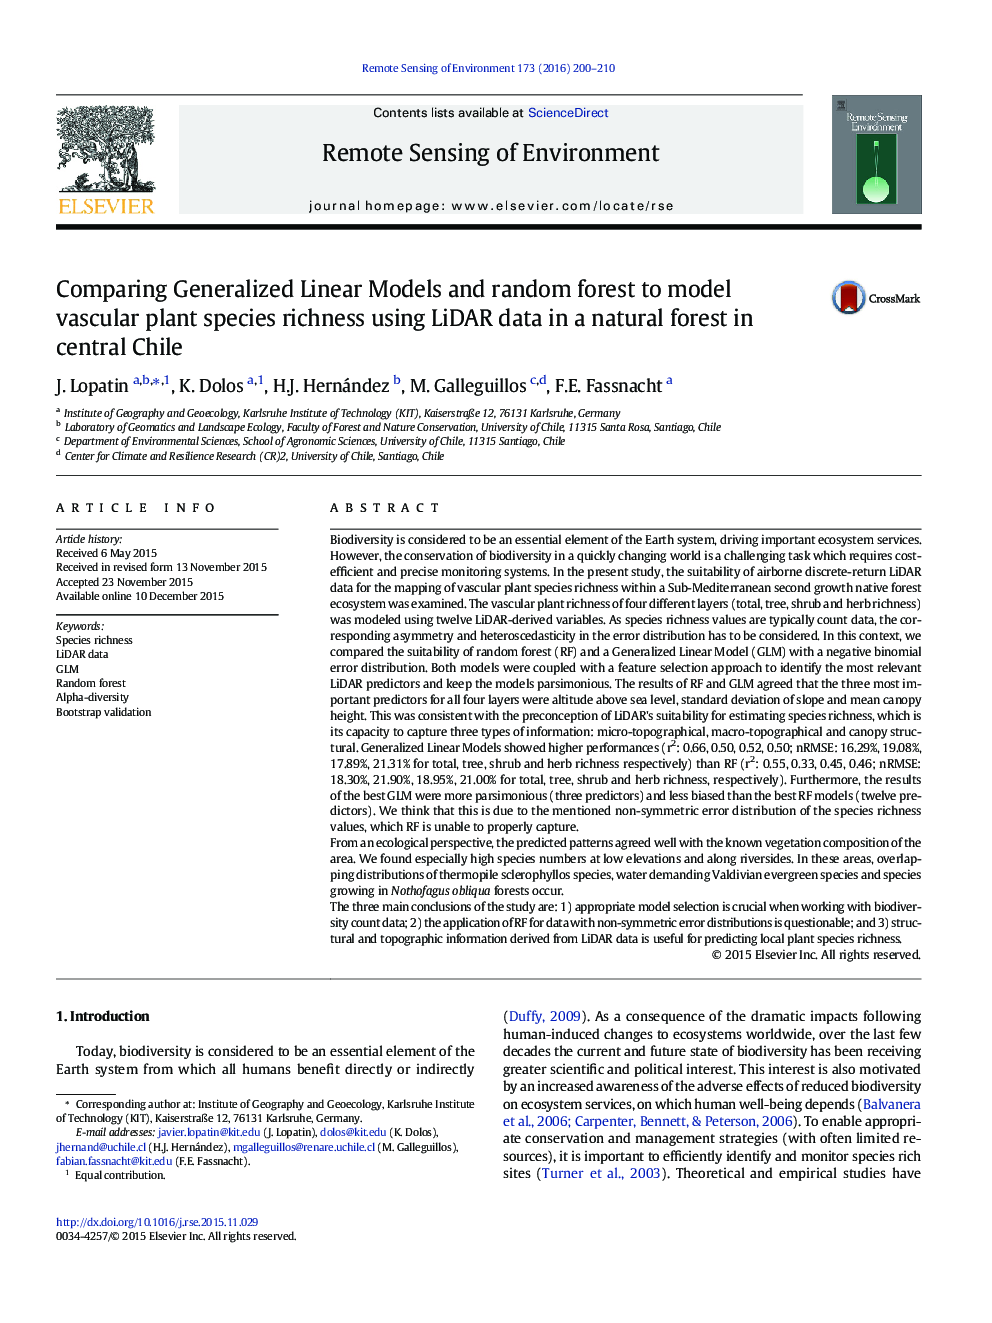 Comparing Generalized Linear Models and random forest to model vascular plant species richness using LiDAR data in a natural forest in central Chile